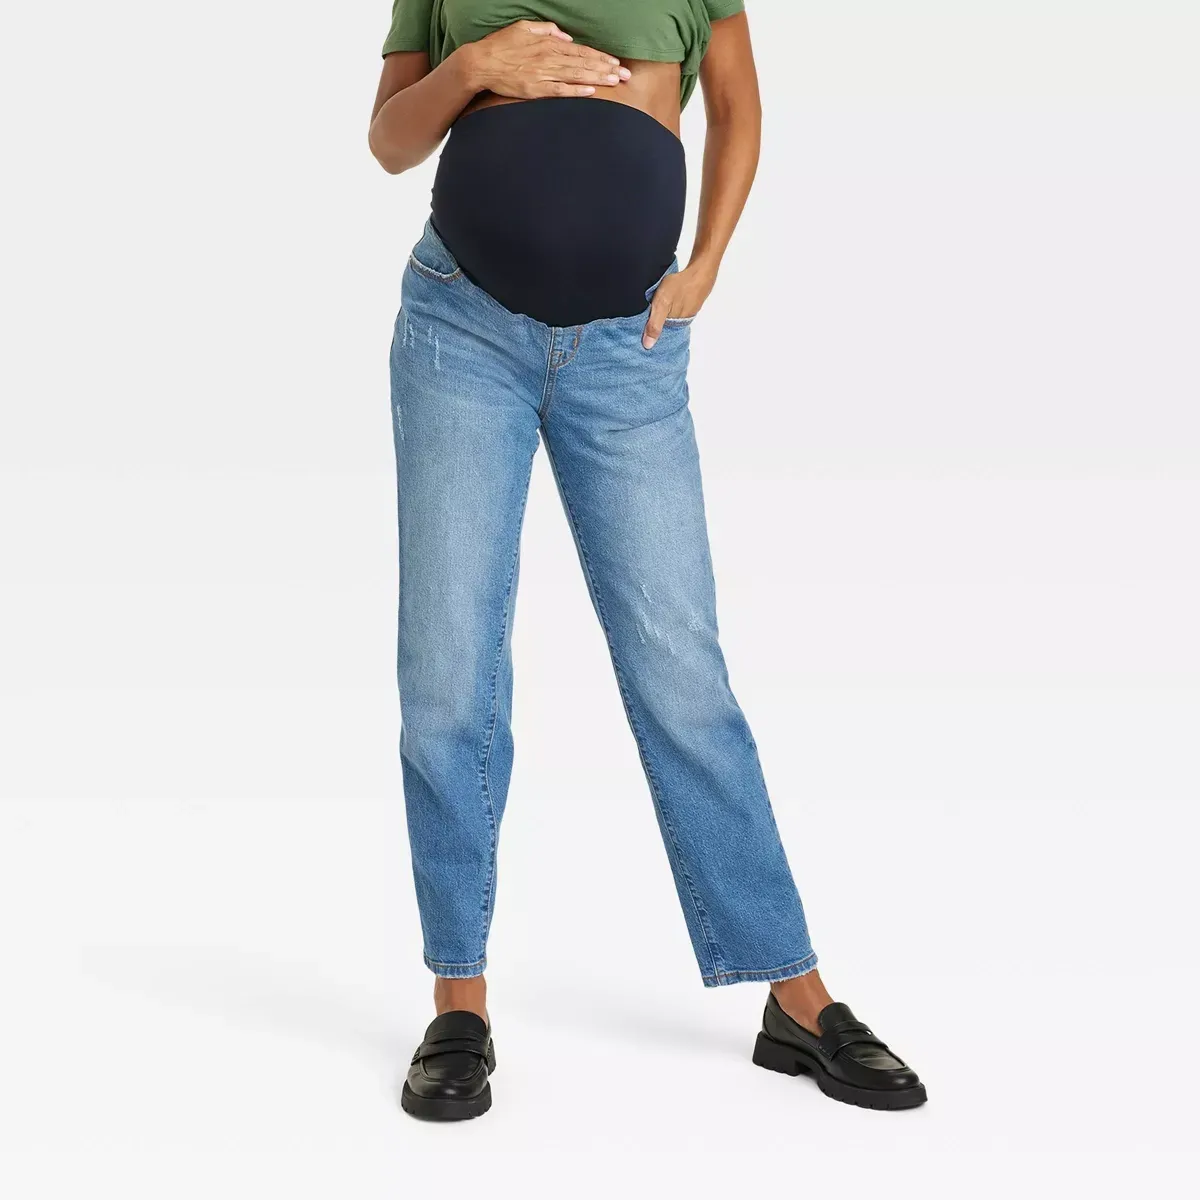 The Best Maternity To Postpartum Fashion